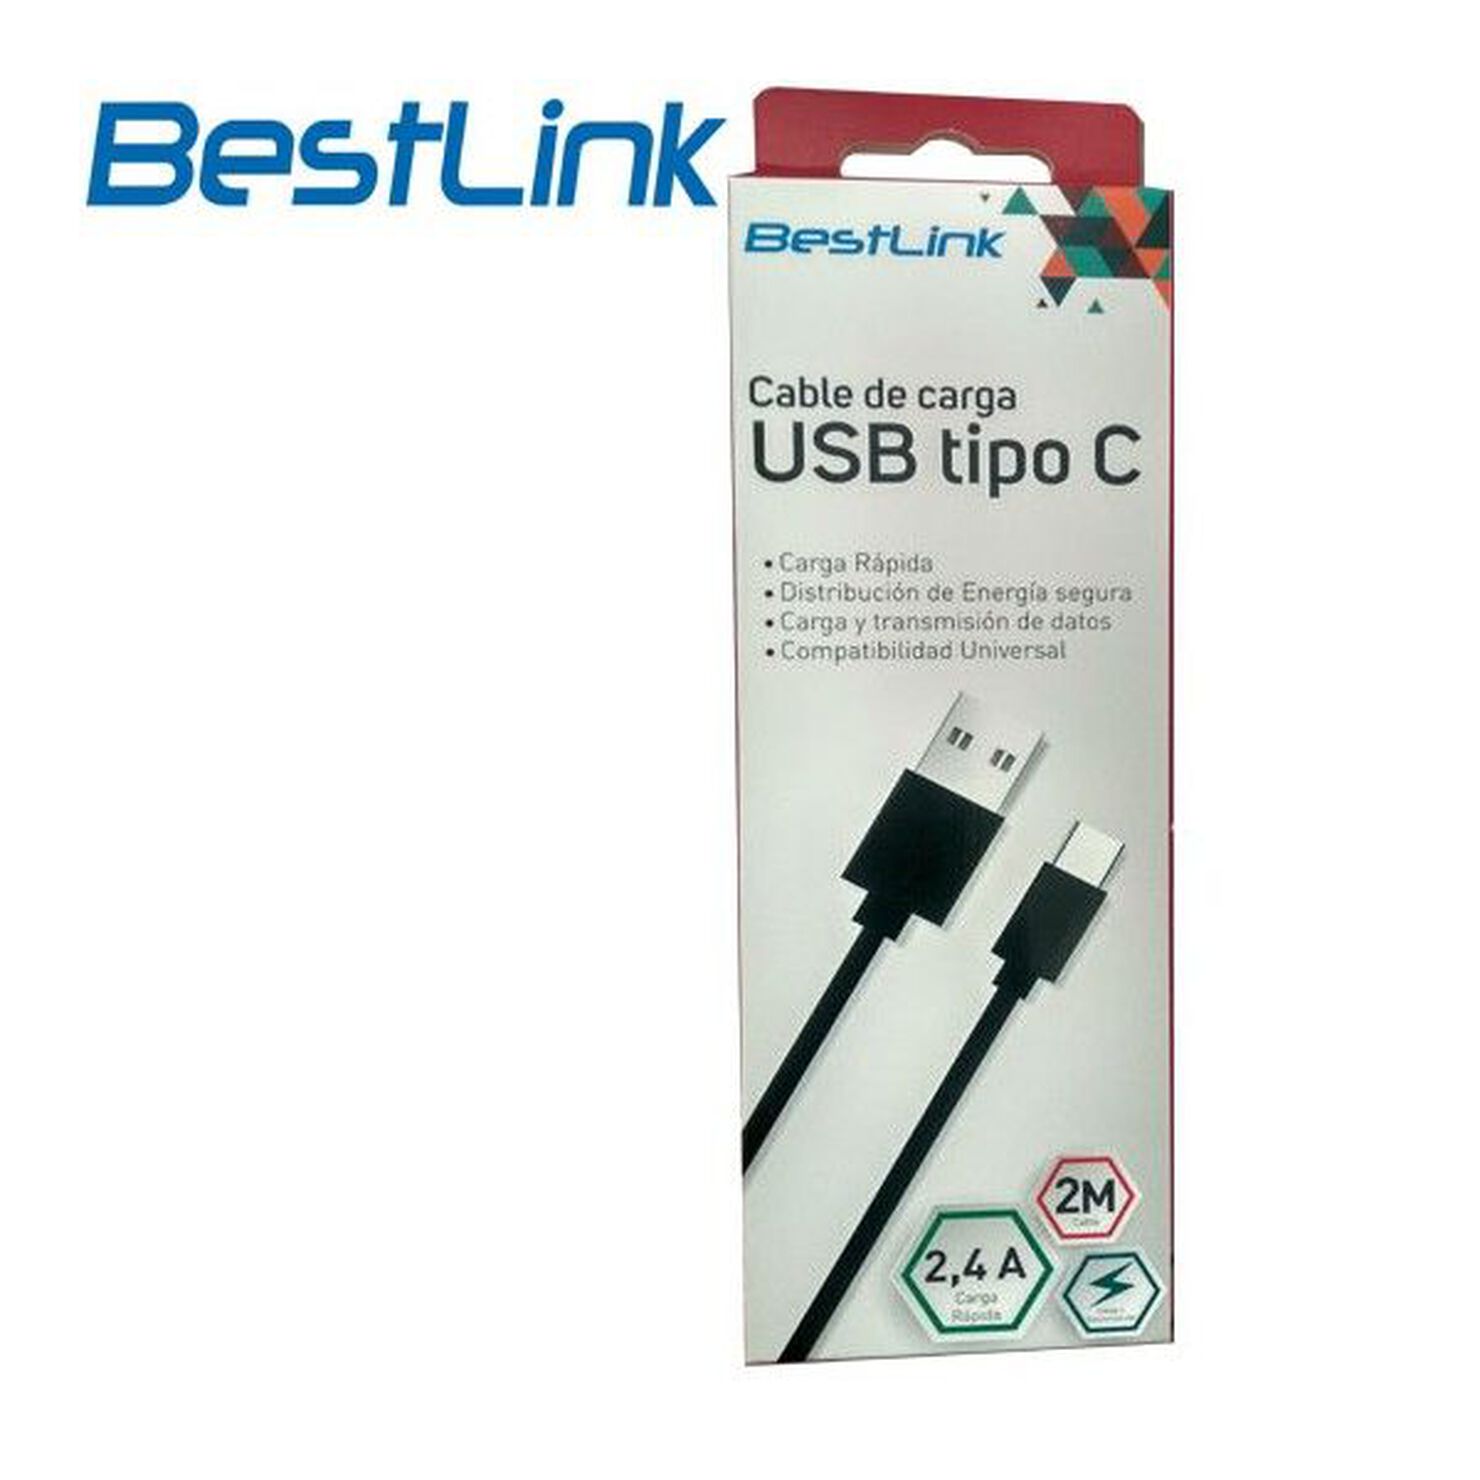 Cable USB tipo C Bestlink